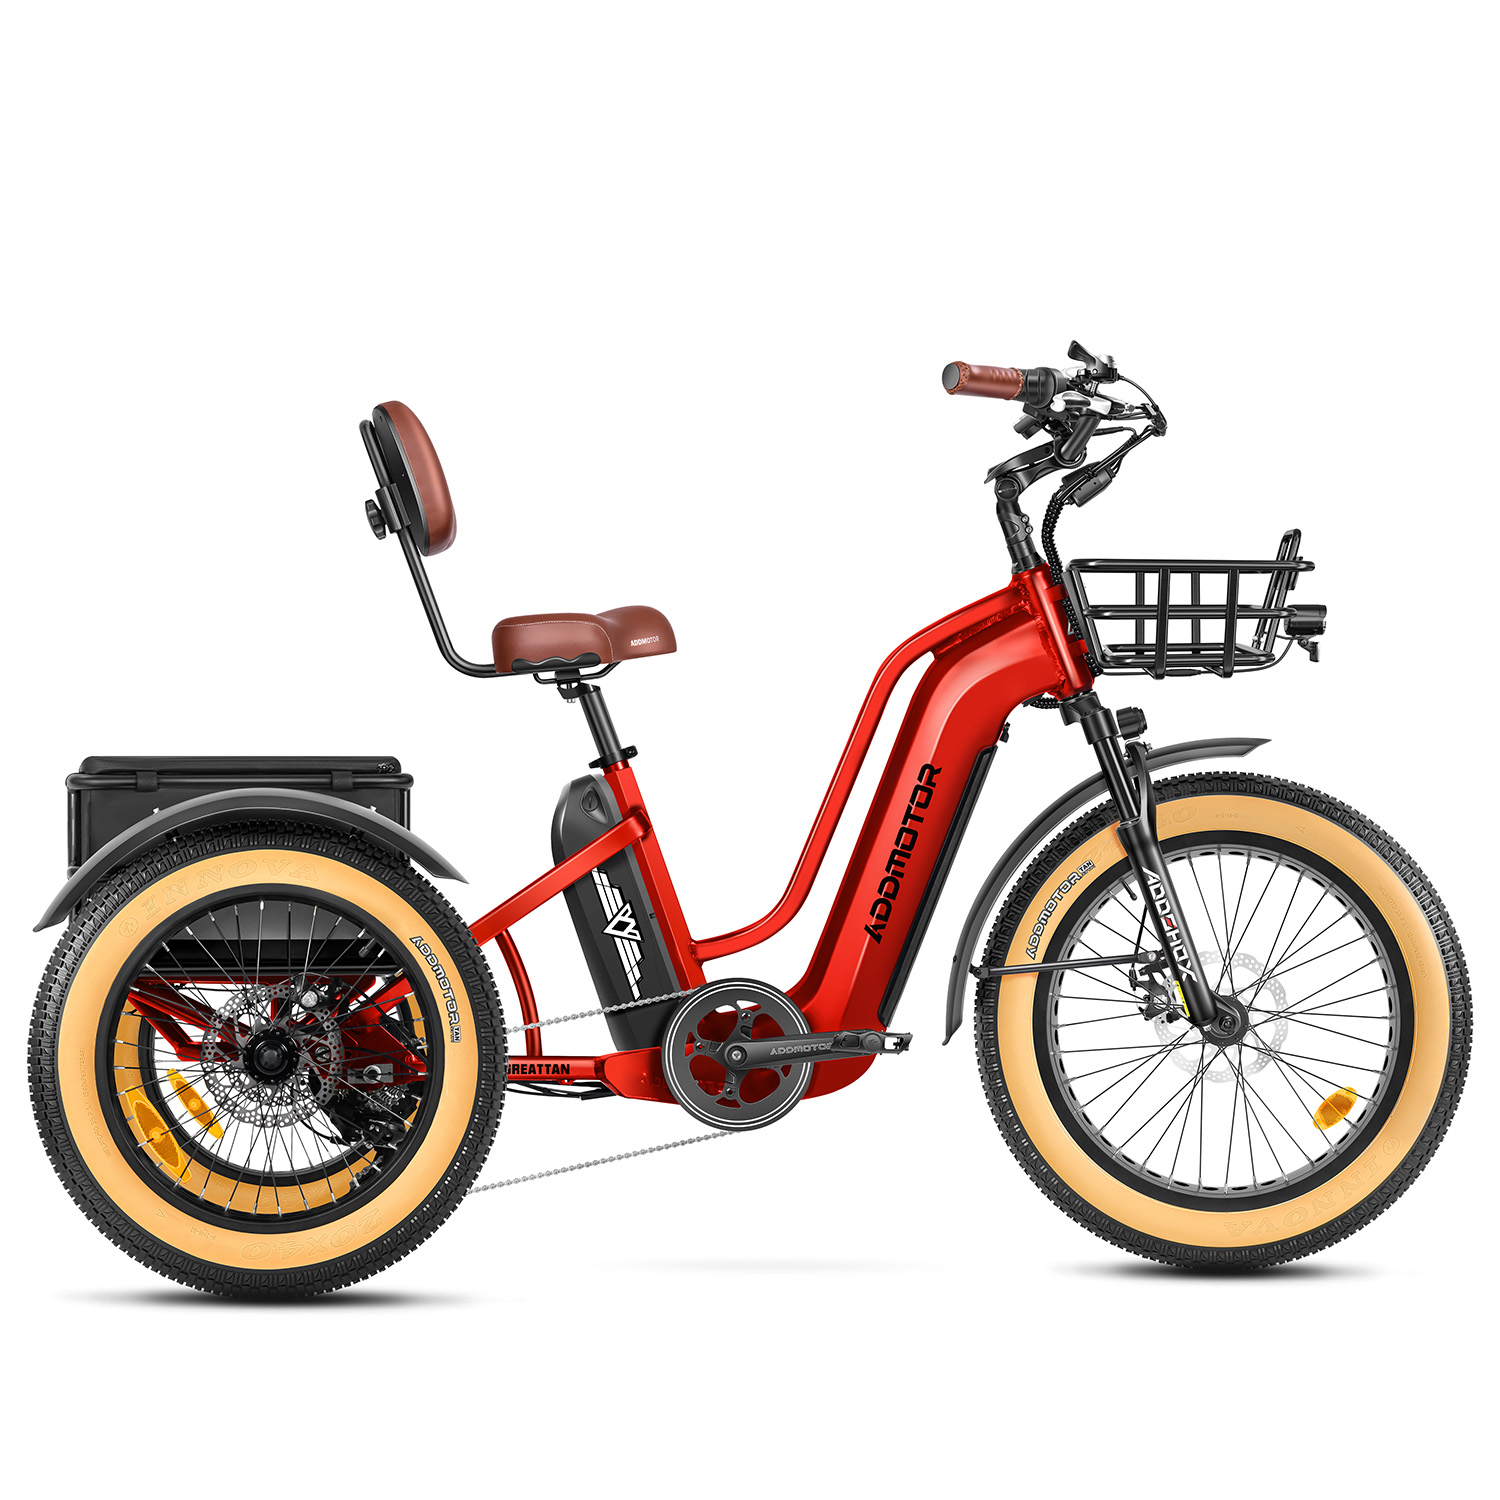 Addmotor Greattan Dual-Battery Electric Trike for Adult | Fat Tire Built-in Battery Design Electric Tricycle | Up to 160+ Miles Range | Red